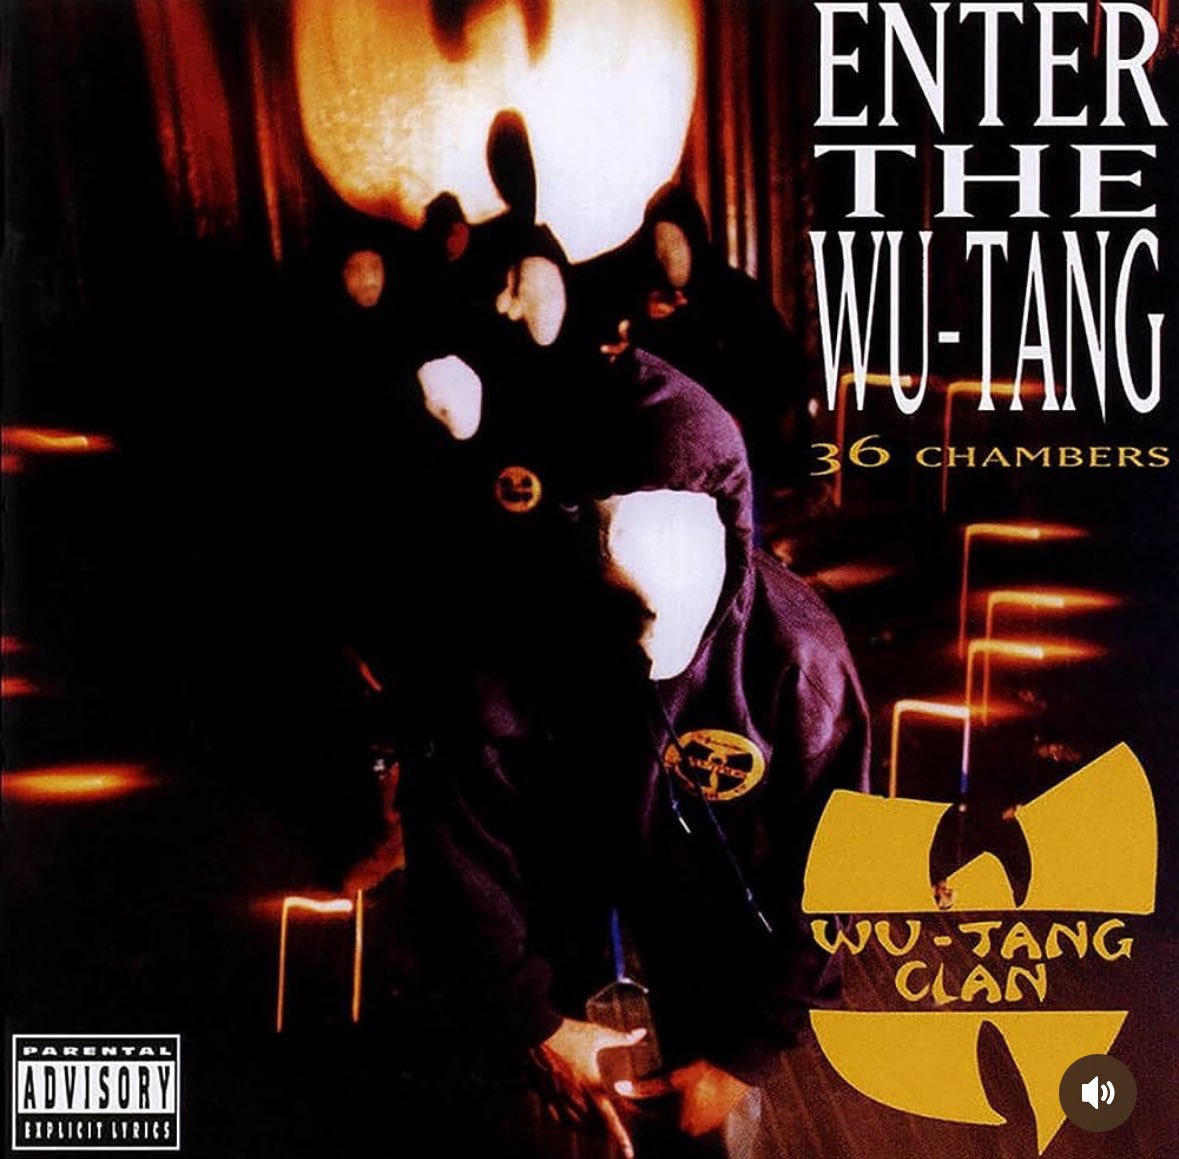 30 years ago today this album changed hip-hop forever. Legendary. #36chambers #wutang #throwbackthursday 🐝🎤🔥